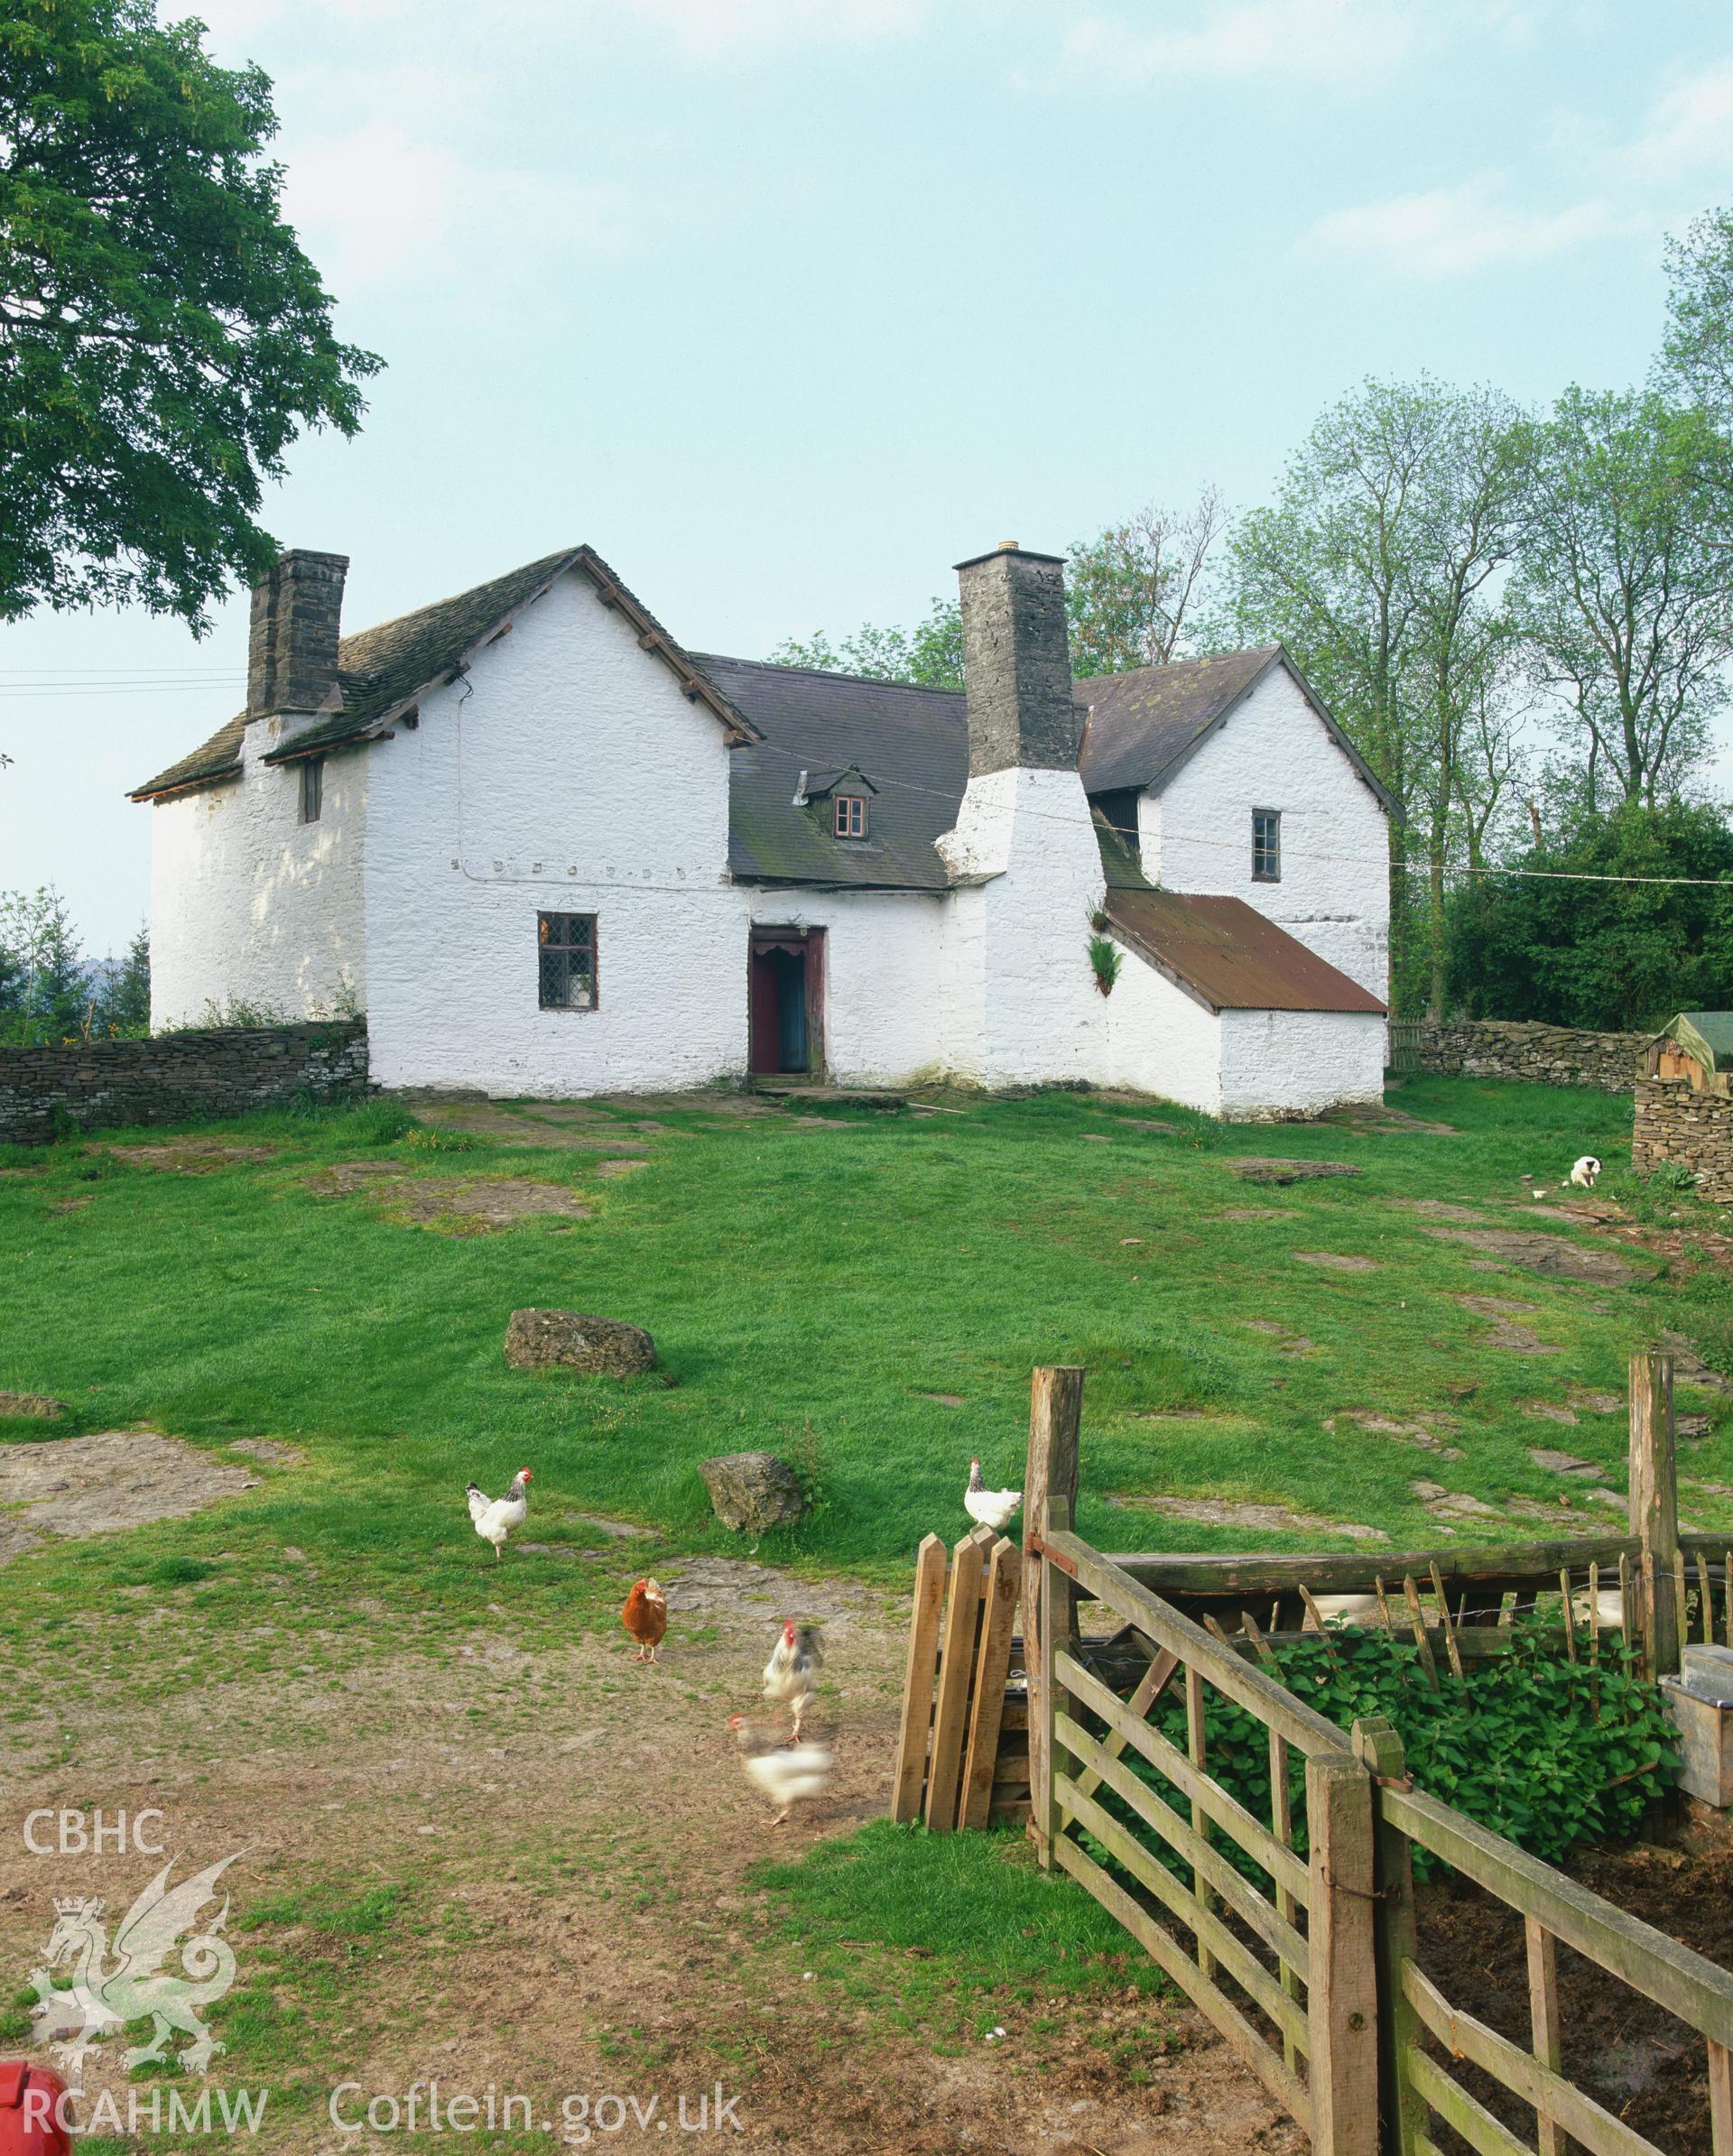 RCAHMW colour transparency showing Ciliau, Painscastle, taken by Iain Wright, May 2004